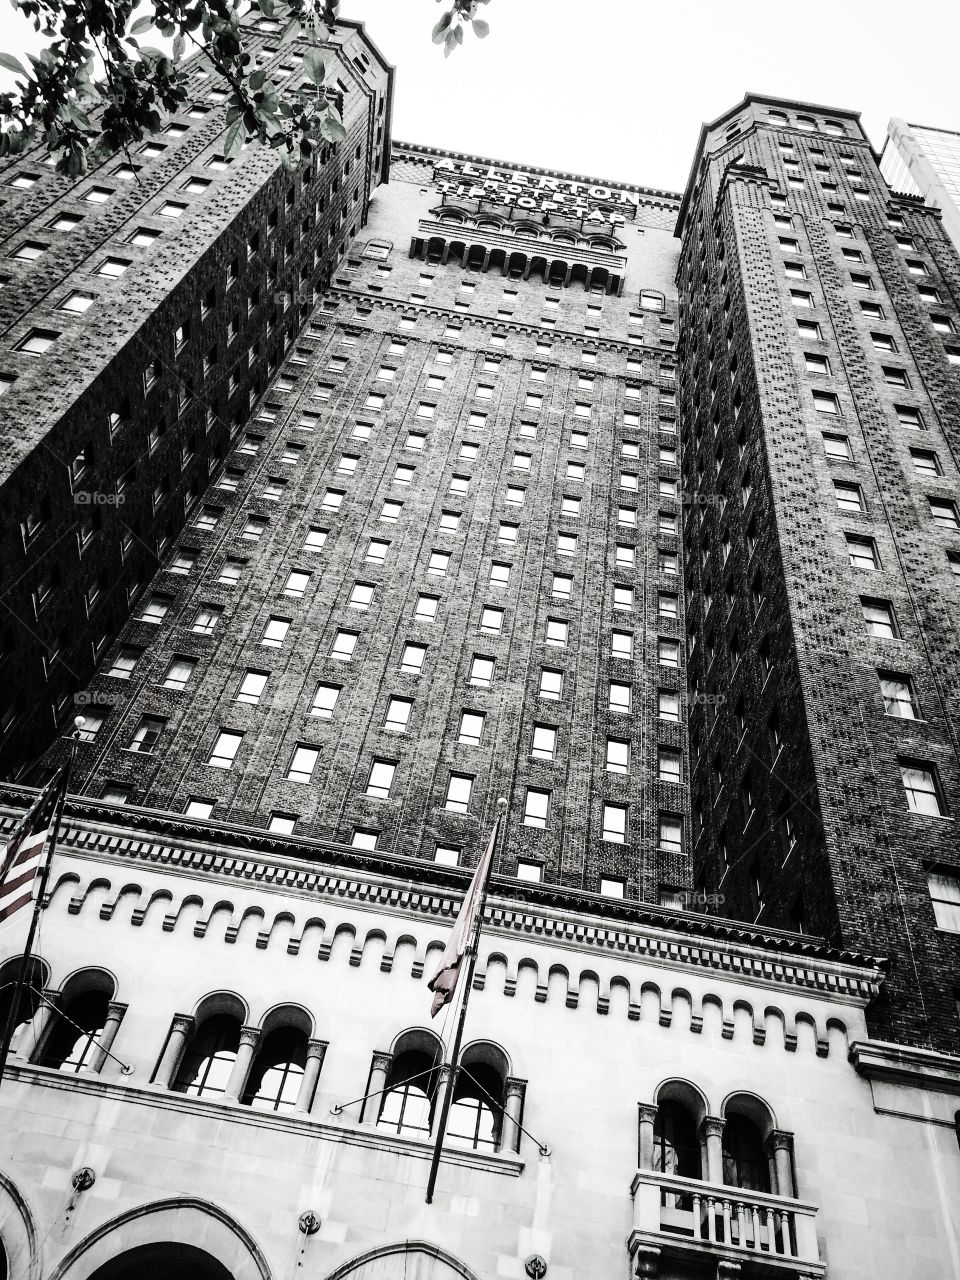 Allerton Hotel, Michigan Avenue, Chicago. Home of the famous Tip Top Tap which unfortunately is no longer open to the public. 